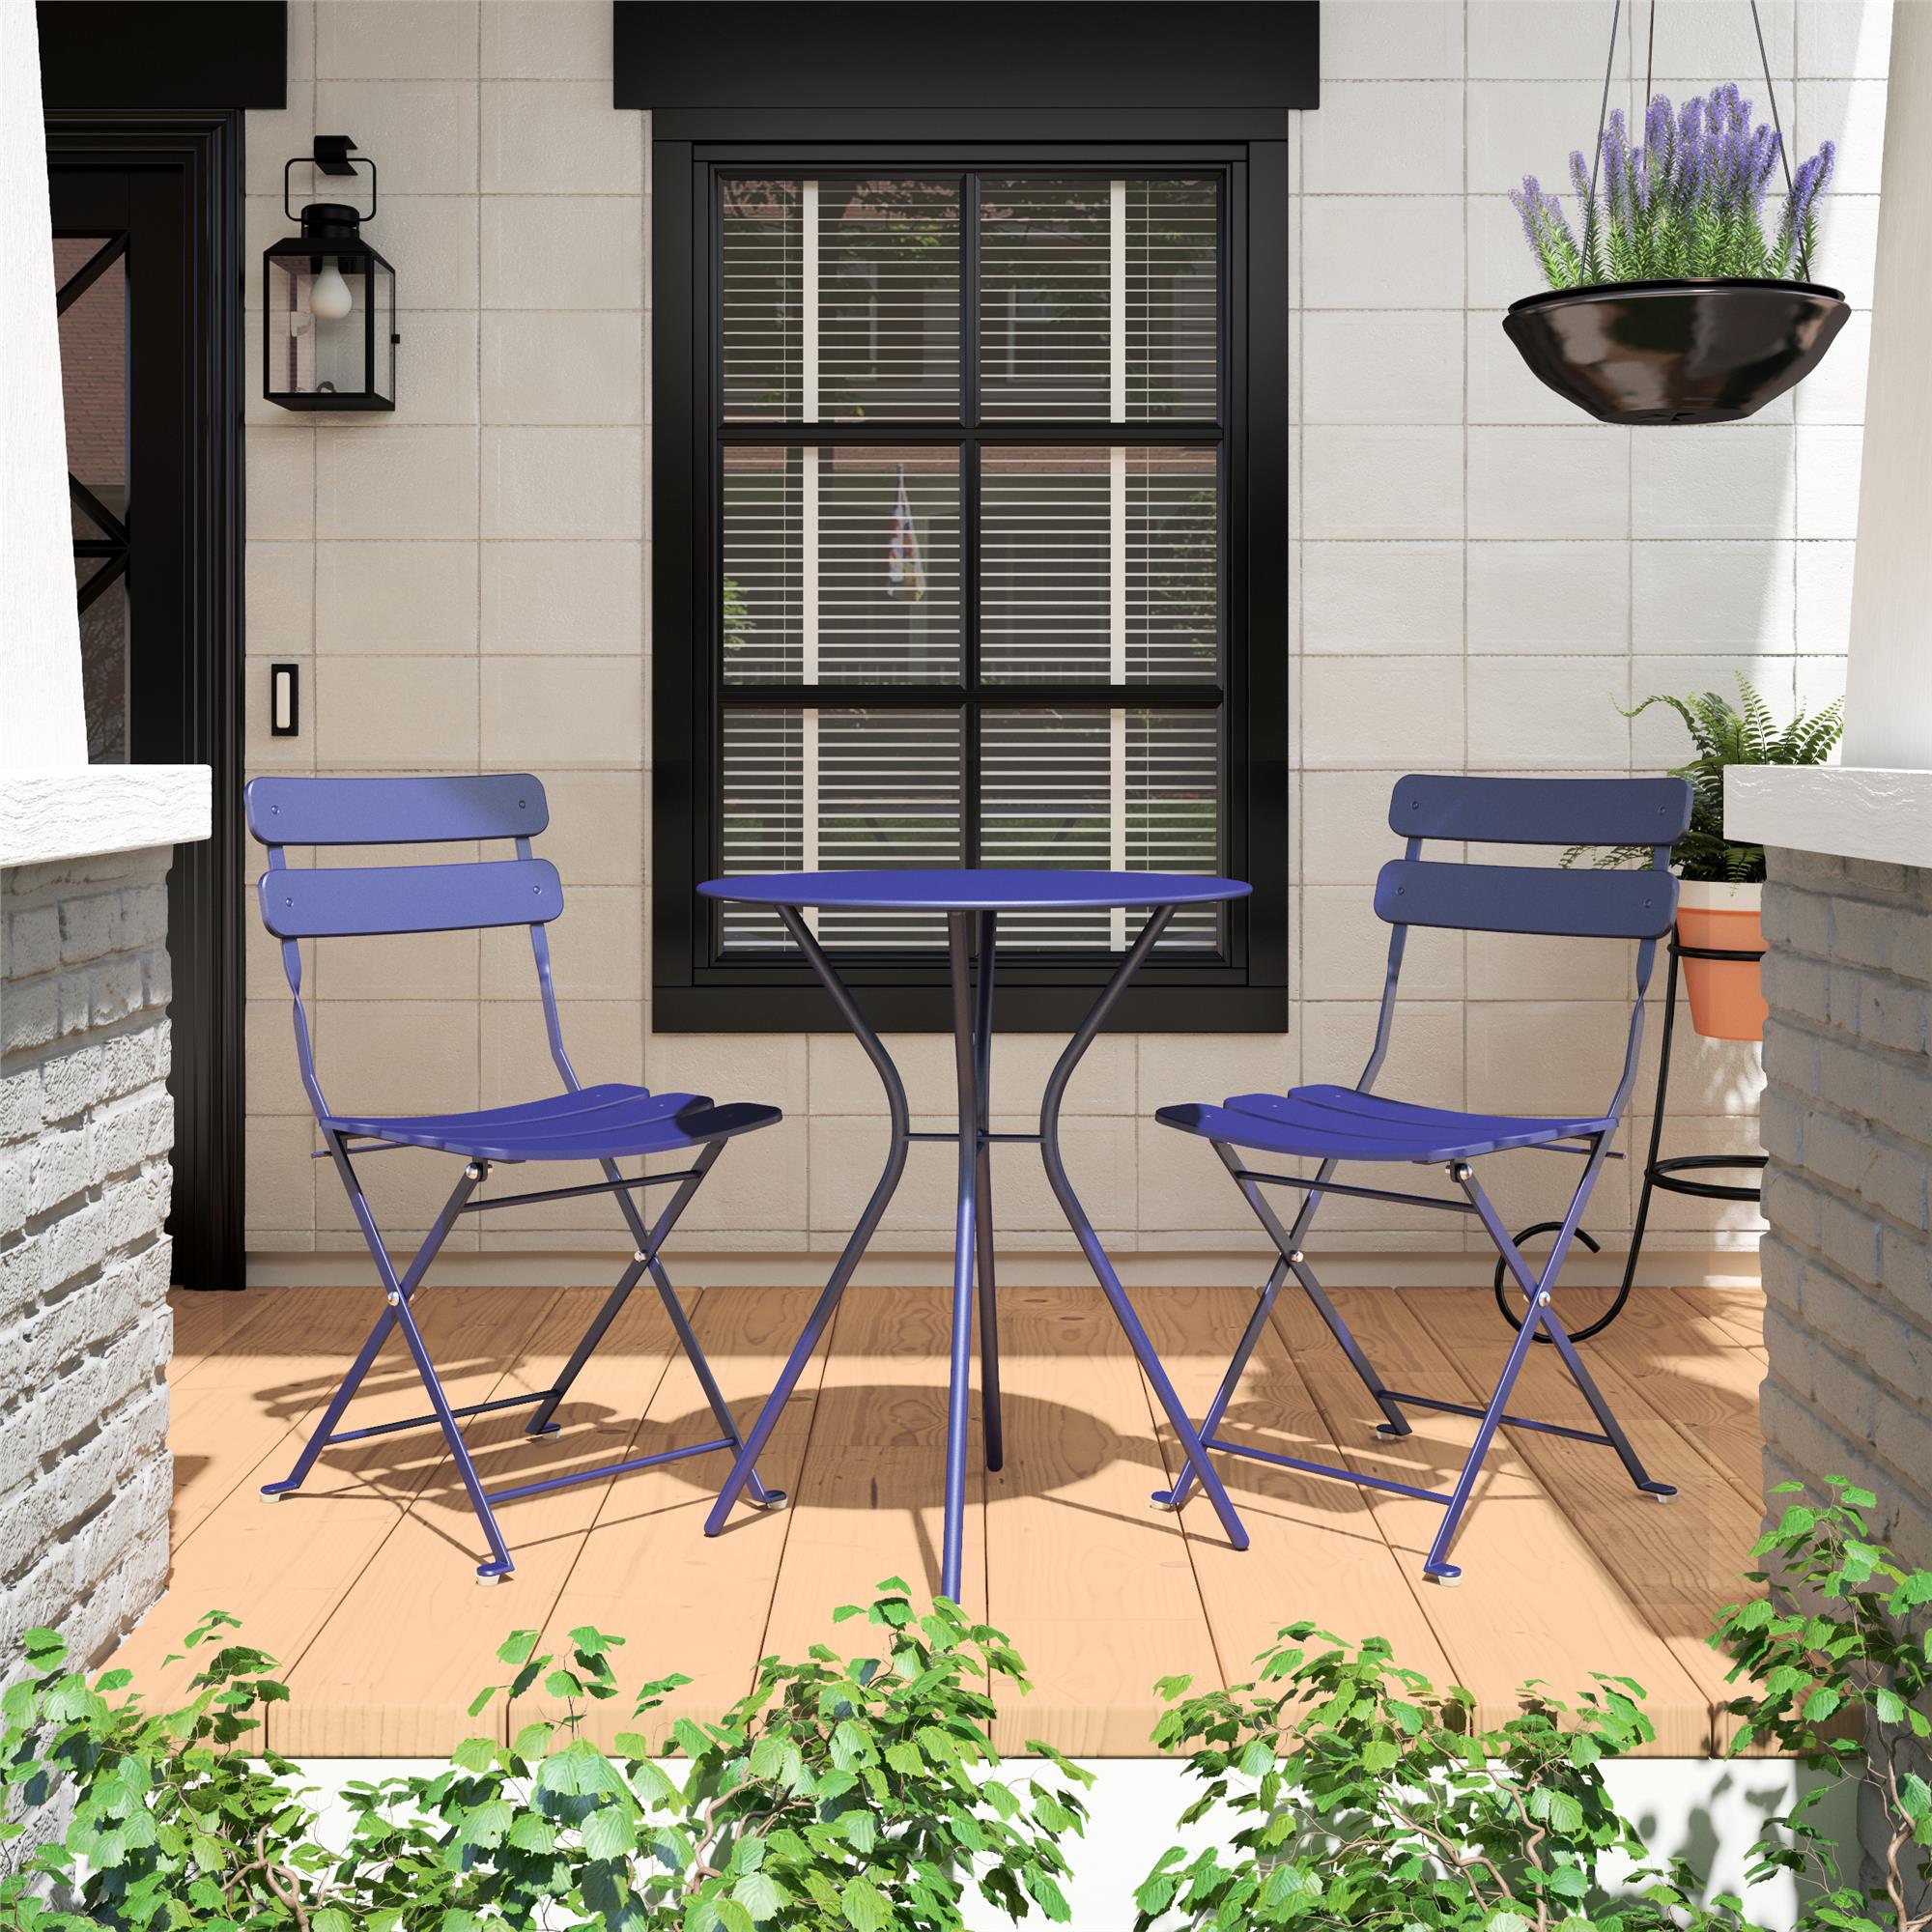 COSCO Outdoor Living, 3 Piece Bistro Set with 2 Folding Chairs, Navy - image 1 of 7